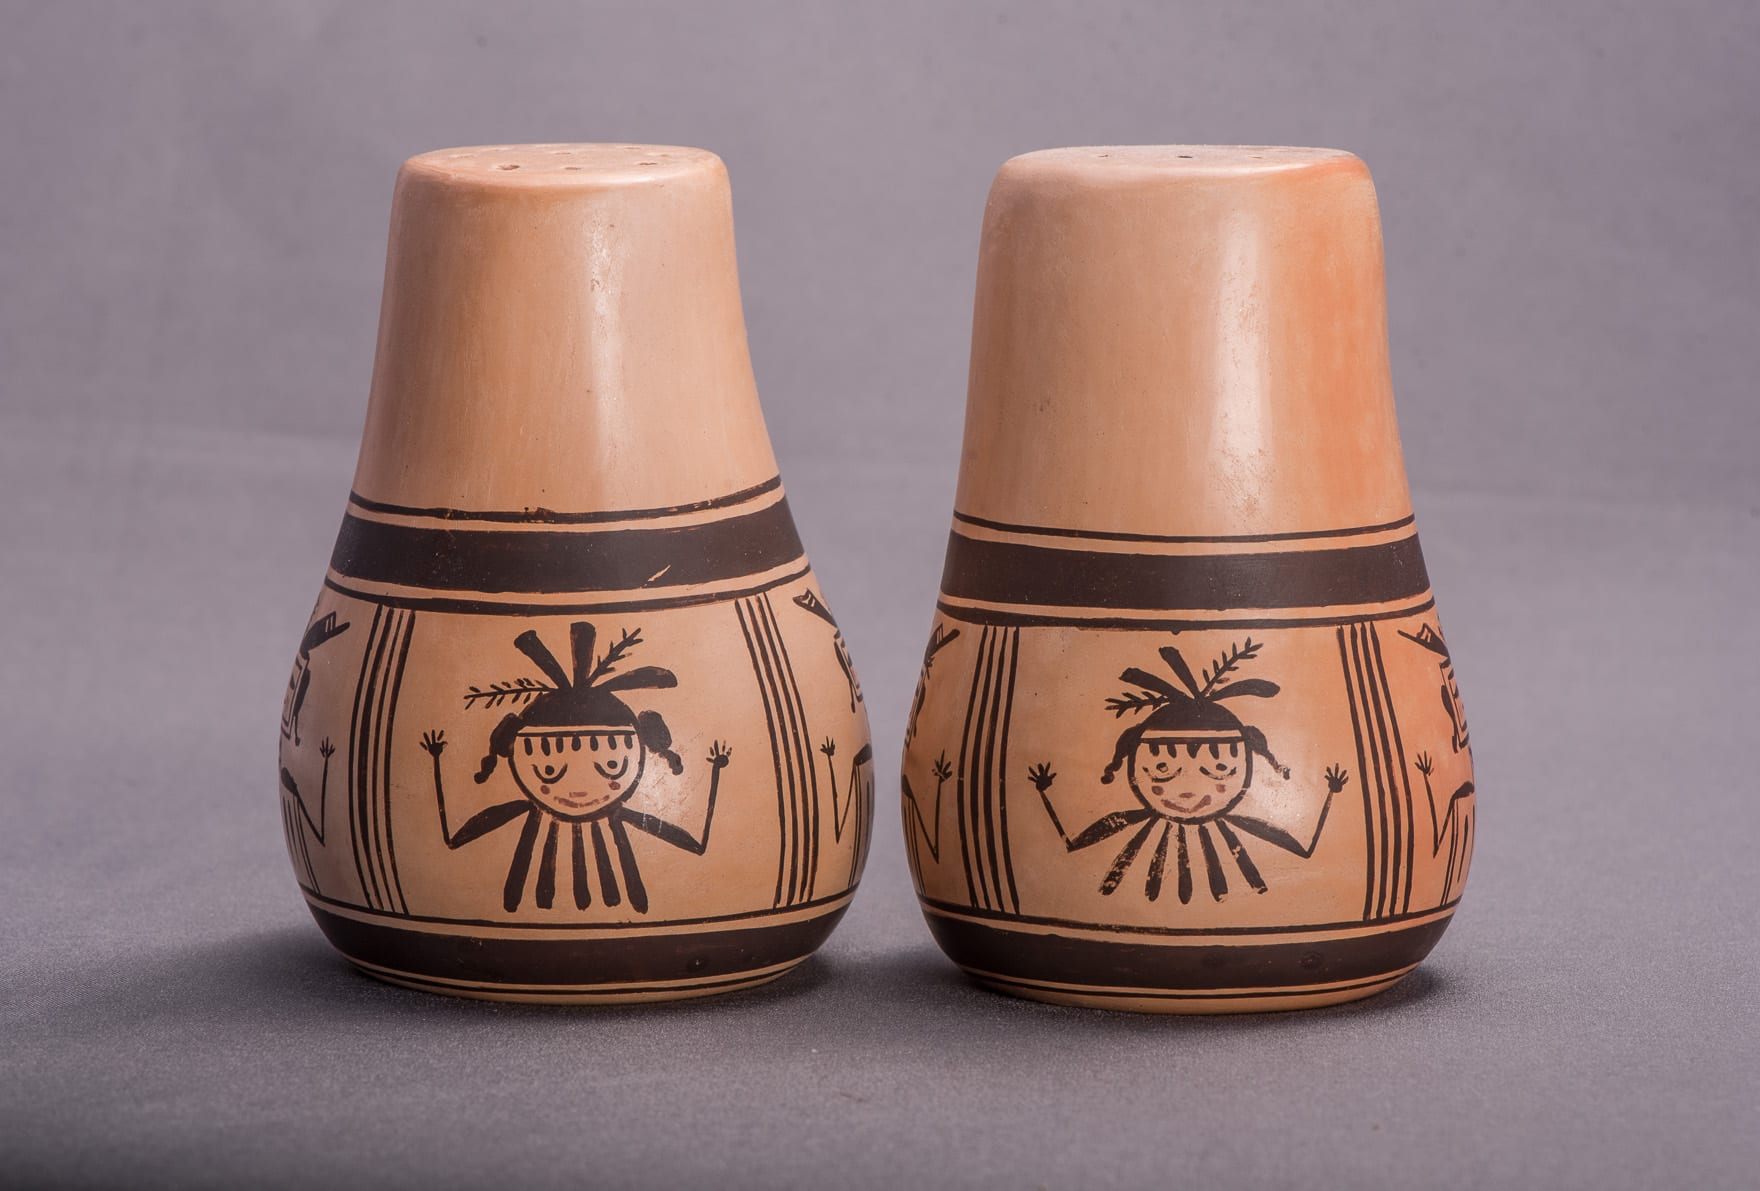 2014-16 Salt & pepper shakers with kachinas